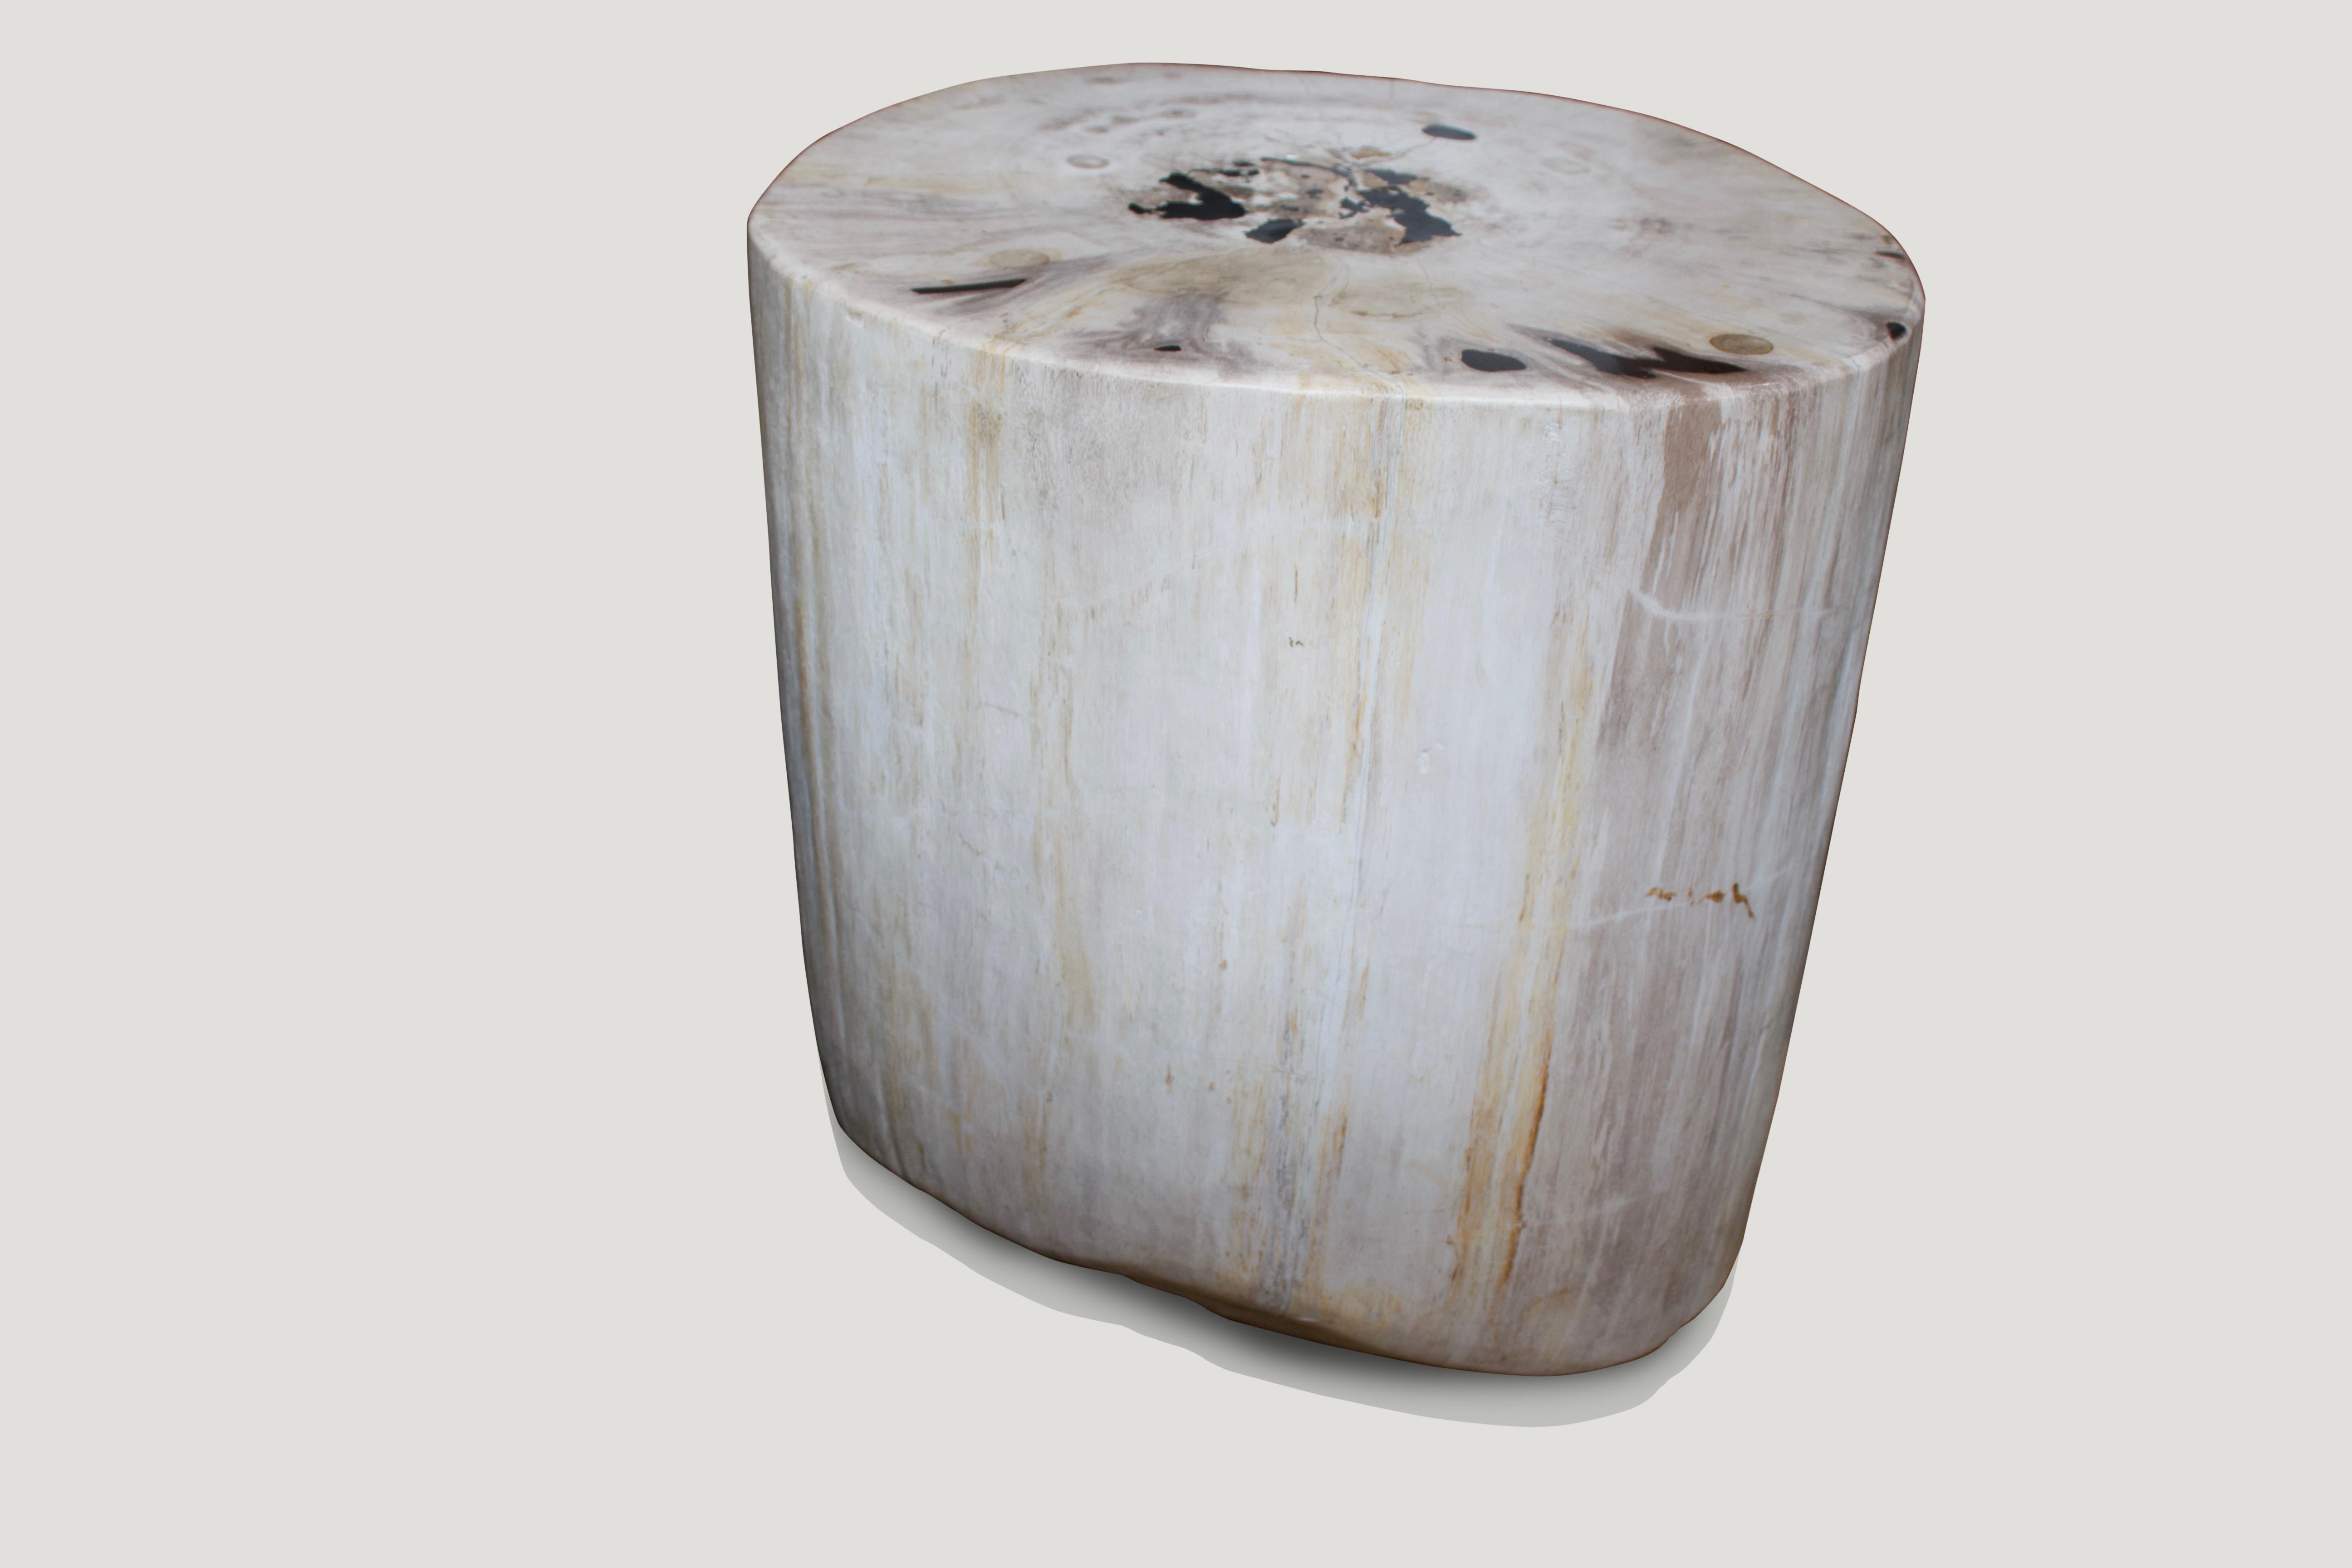 Impressive size and such high quality on this super smooth petrified wood side table. Fabulous contrasting color tones in white with a touch of black.

We source the highest quality petrified wood available. Over 40 million years old. Each piece